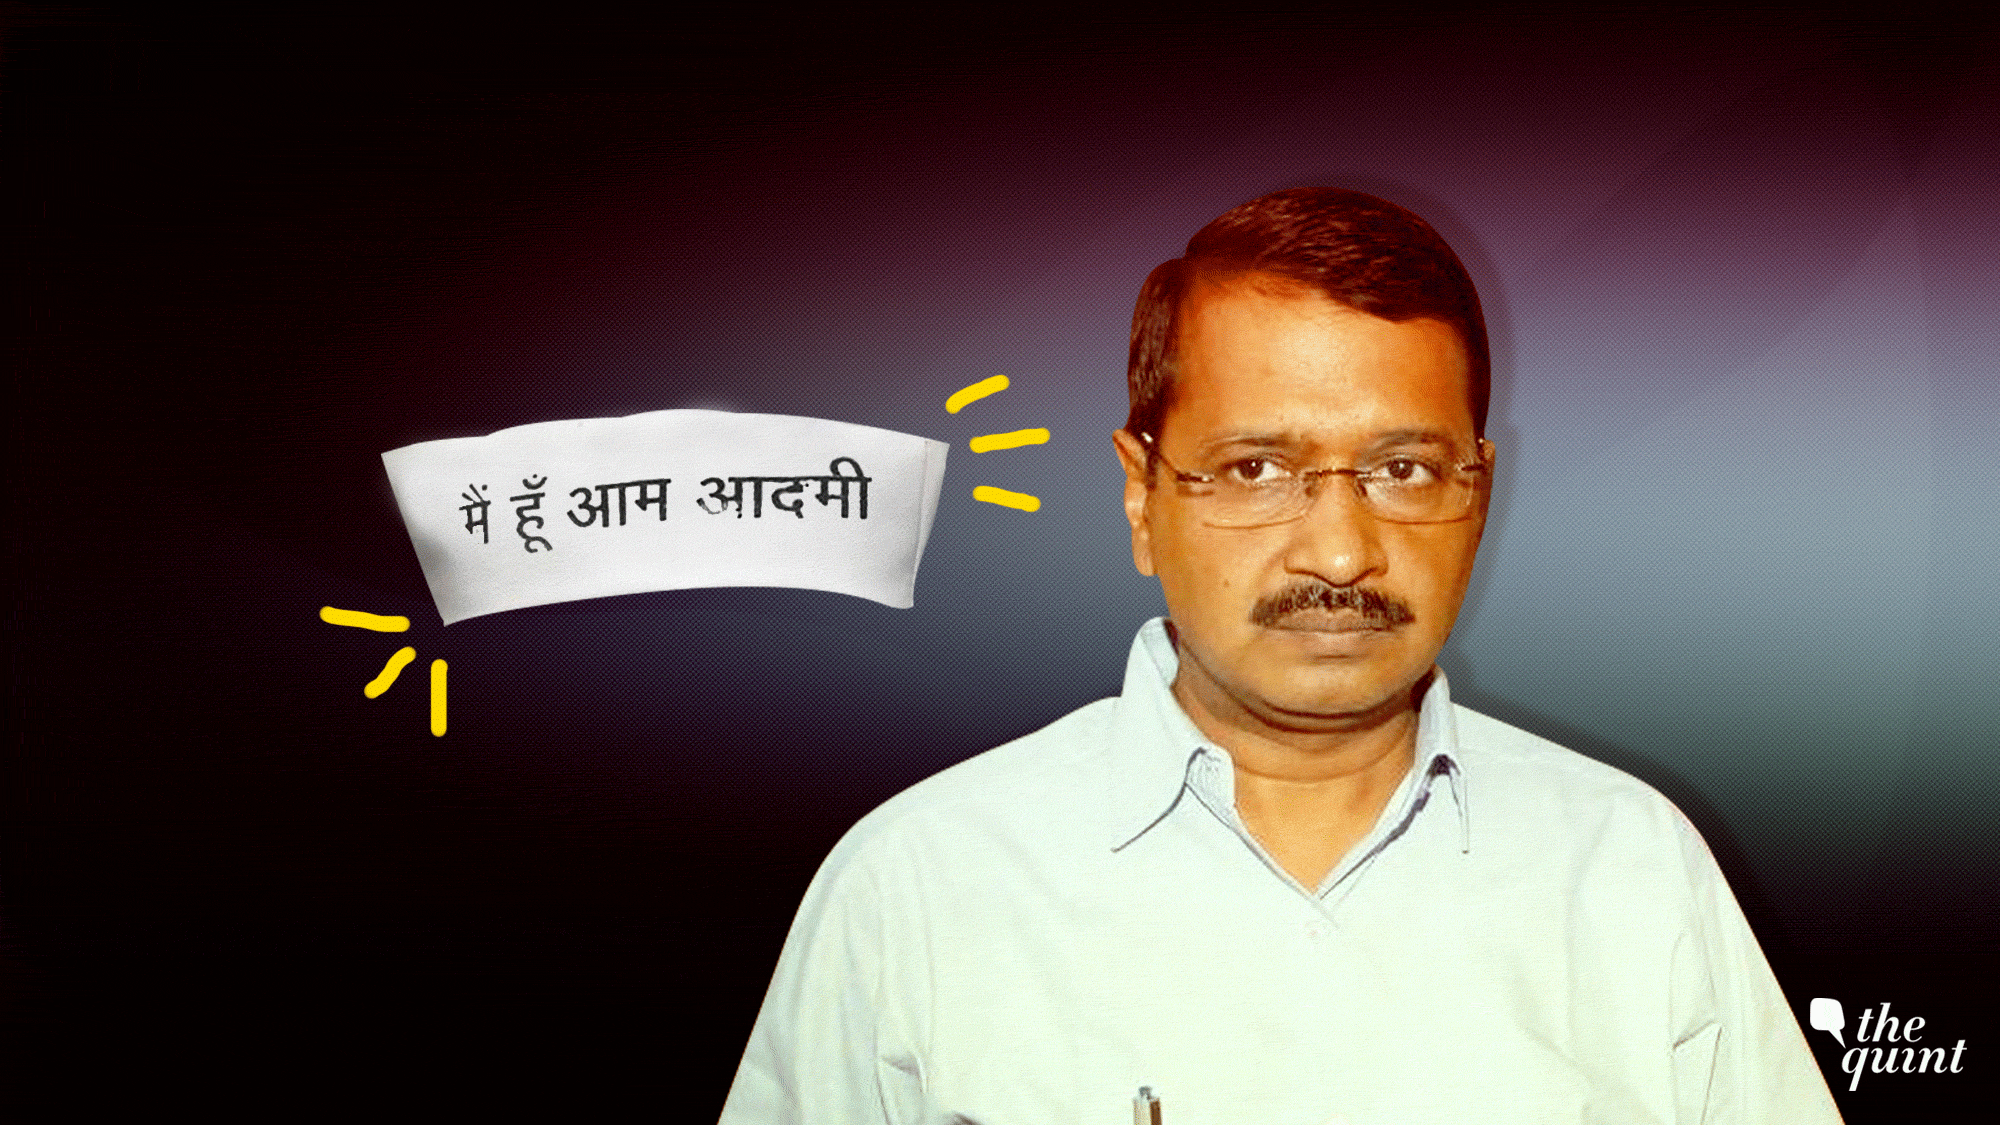 The ripples of AAP Chief Arvind Kejriwal’s political imbroglio are being felt even within his party.